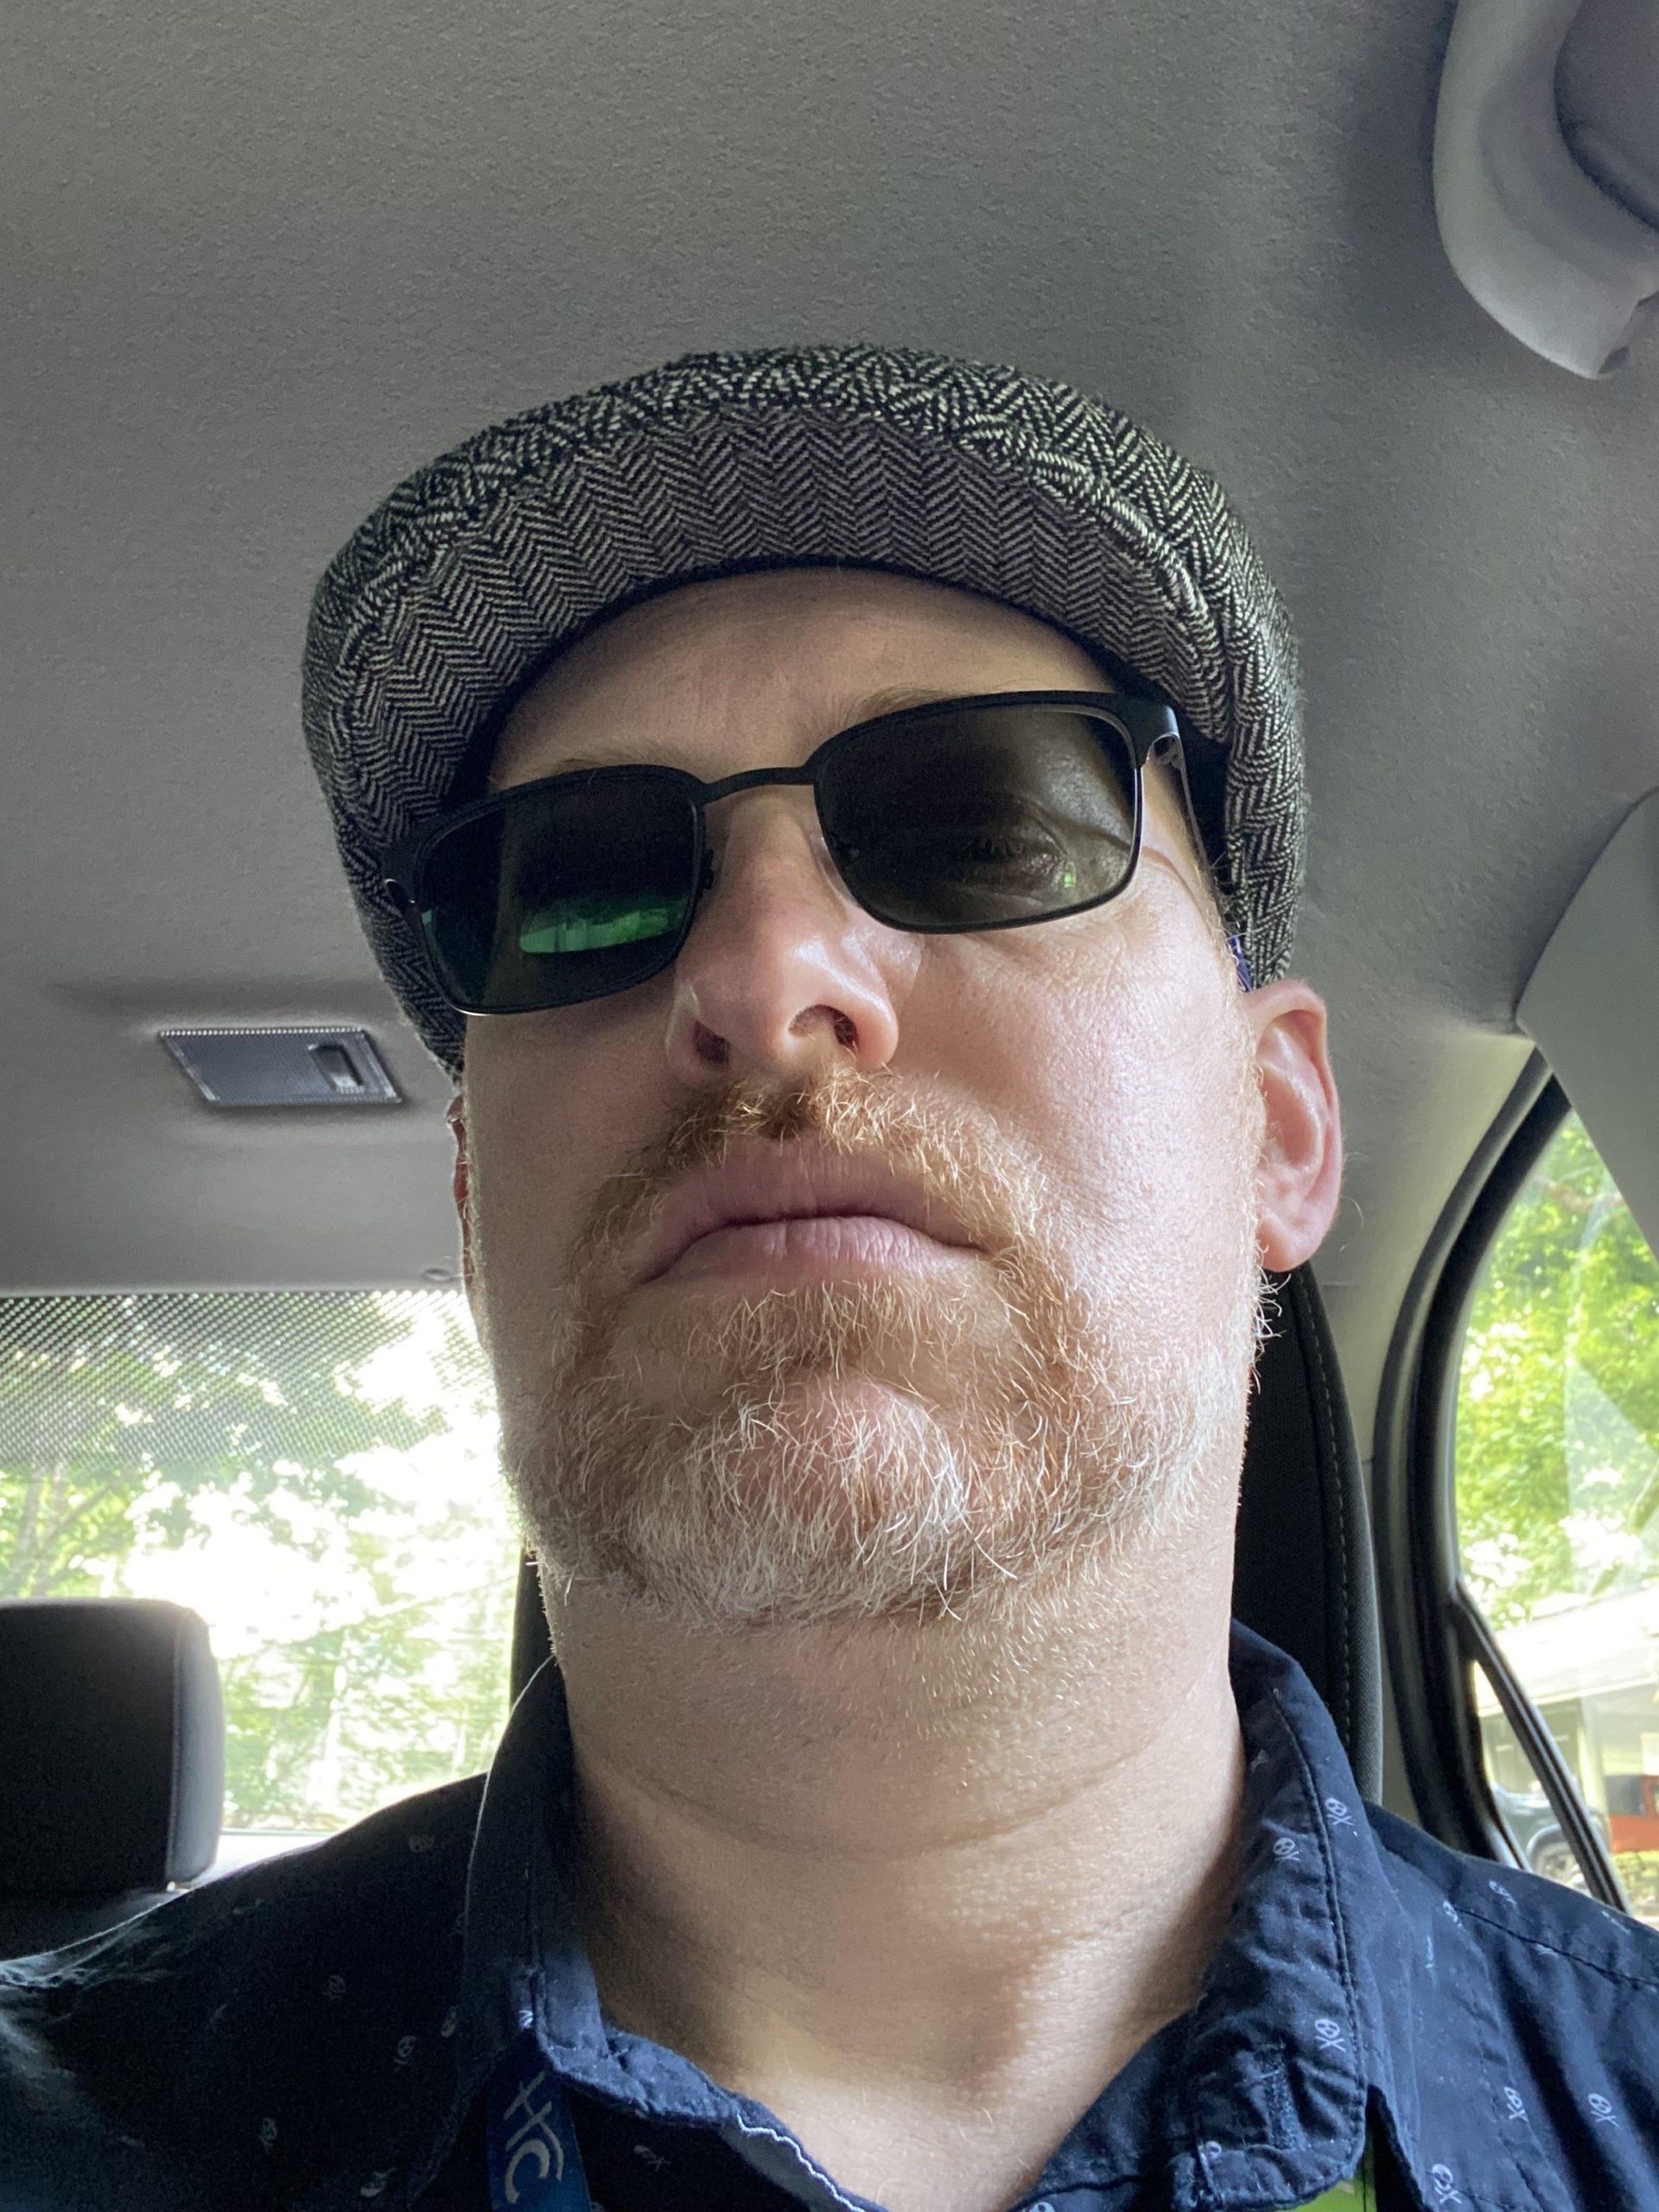 A selfie of me, a 50-year-old white man, sitting in the driver's seat of my car, unsmiling, wearing a hat and sunglasses, not smiling, shot from slightly below.